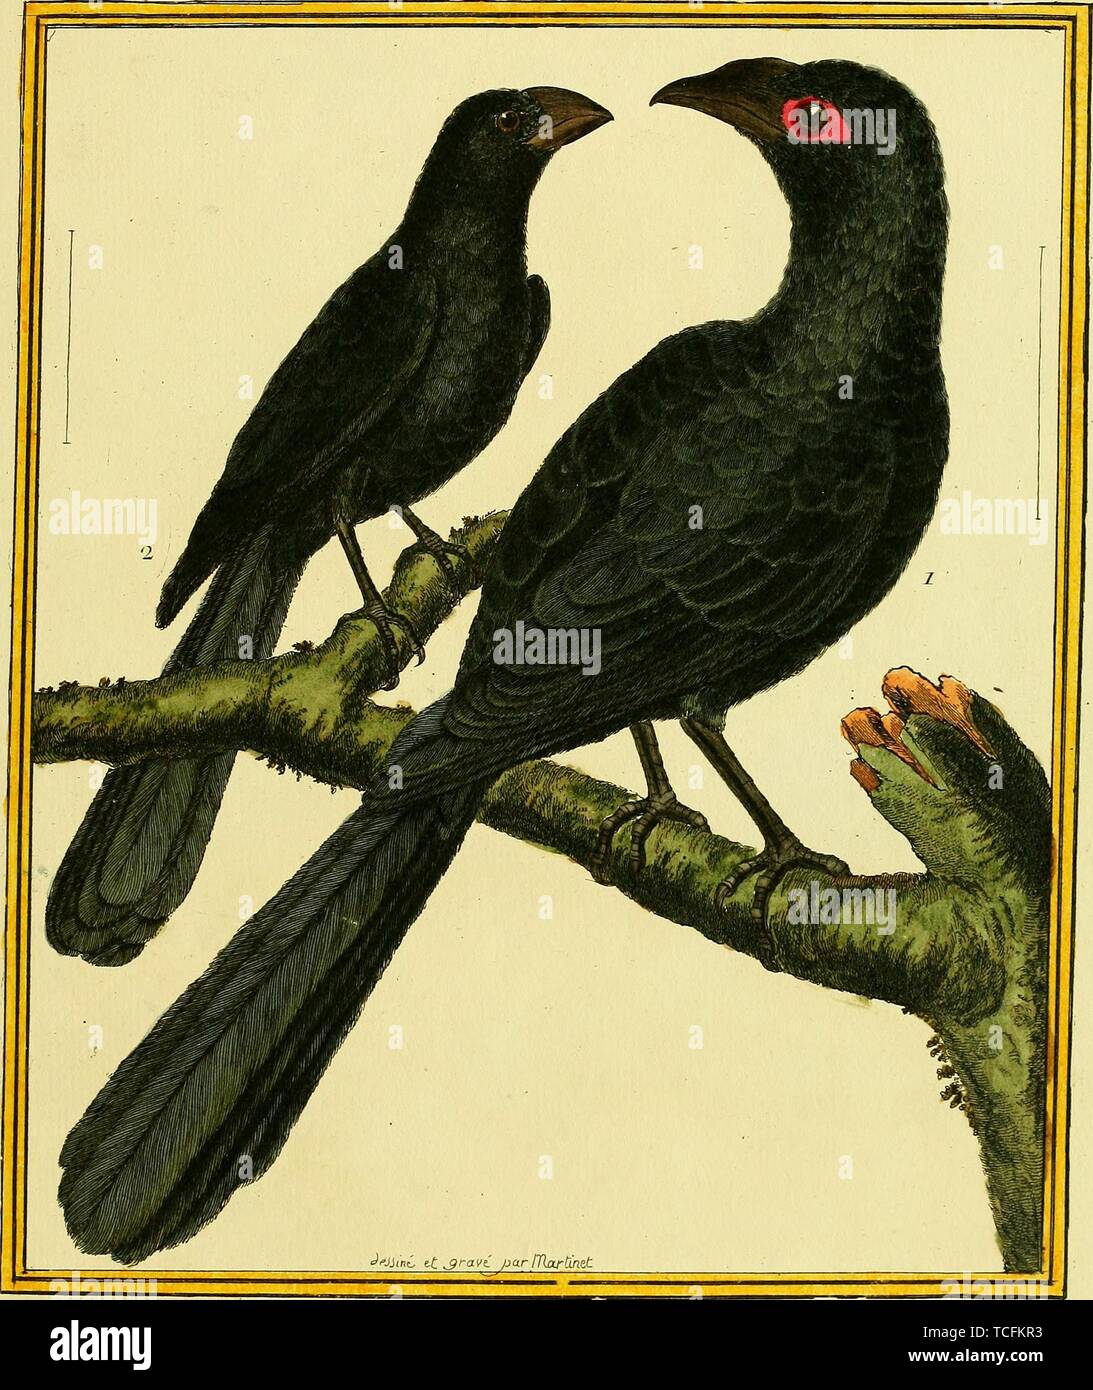 Engraved drawing of the Greater Ani (Crotophaga major) and Smooth-billed Ani (Crotophaga ani), from the book 'Planches enluminees Dhistoire naturelle' by Francois Nicolas, Louis Jean Marie Daubenton, and Edme-Louis Daubenton, 1765. Courtesy Internet Archive. () Stock Photo